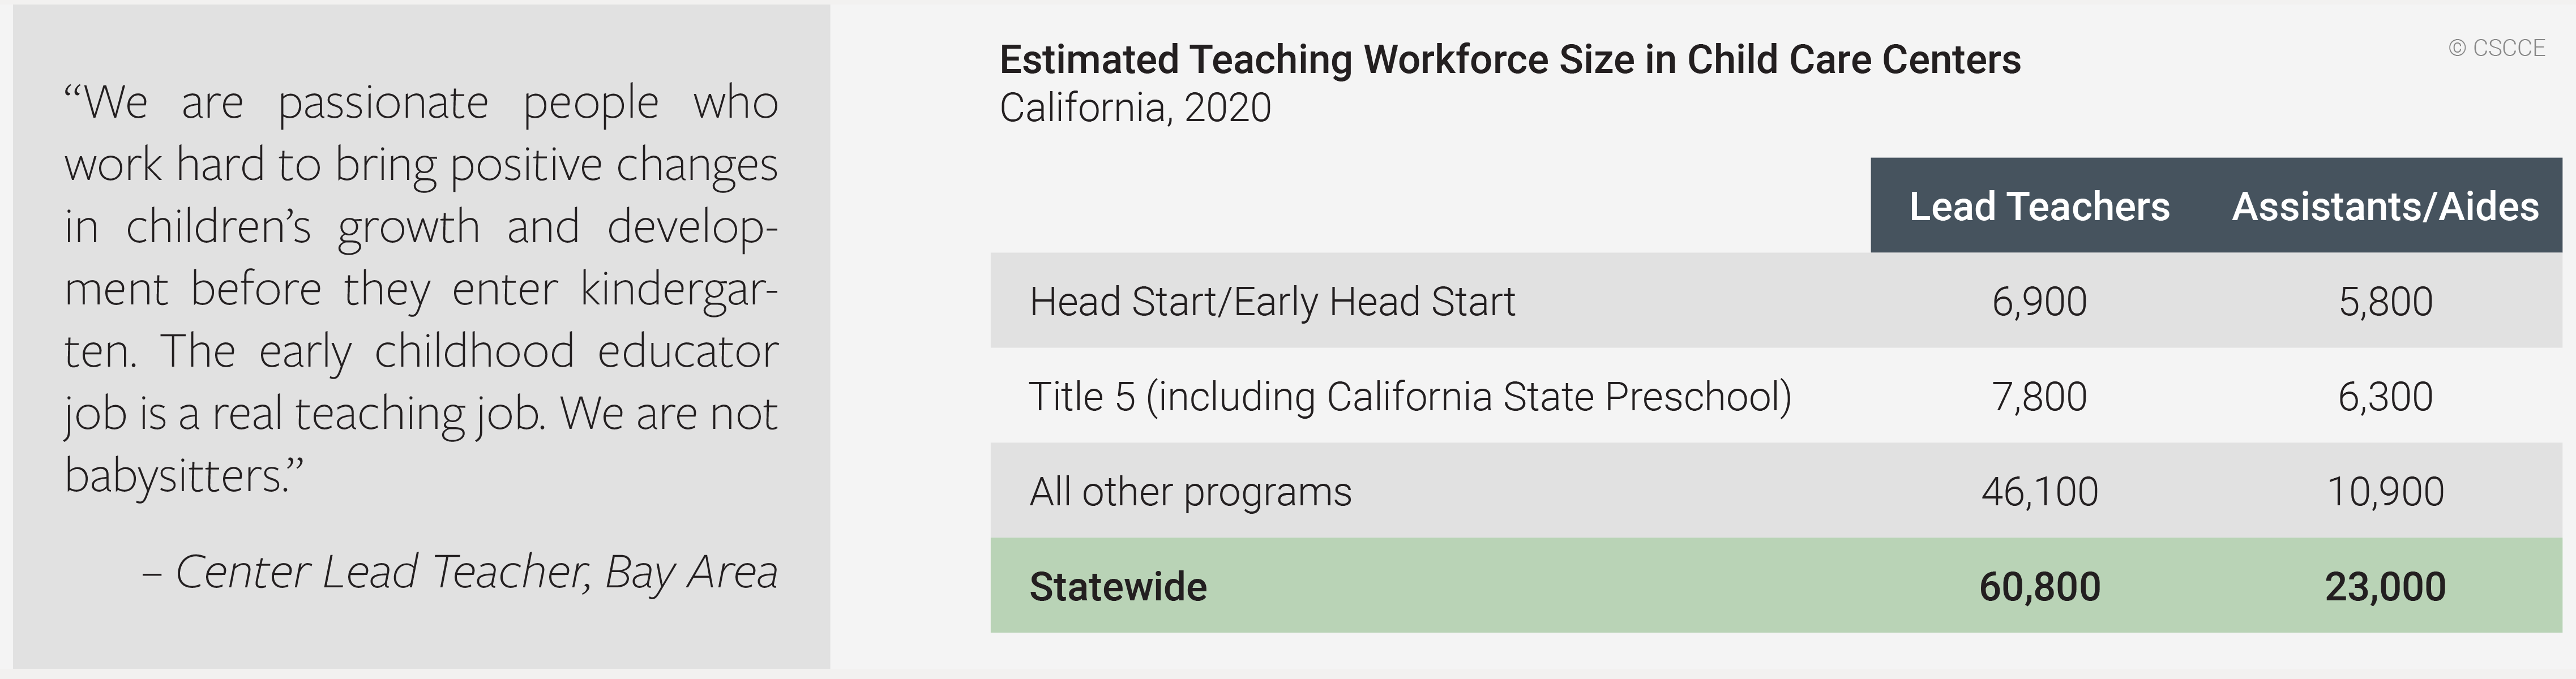 Estimated teaching workforce in California child care centers: 60,800 lead teachers and 23,000 assistants or aides.